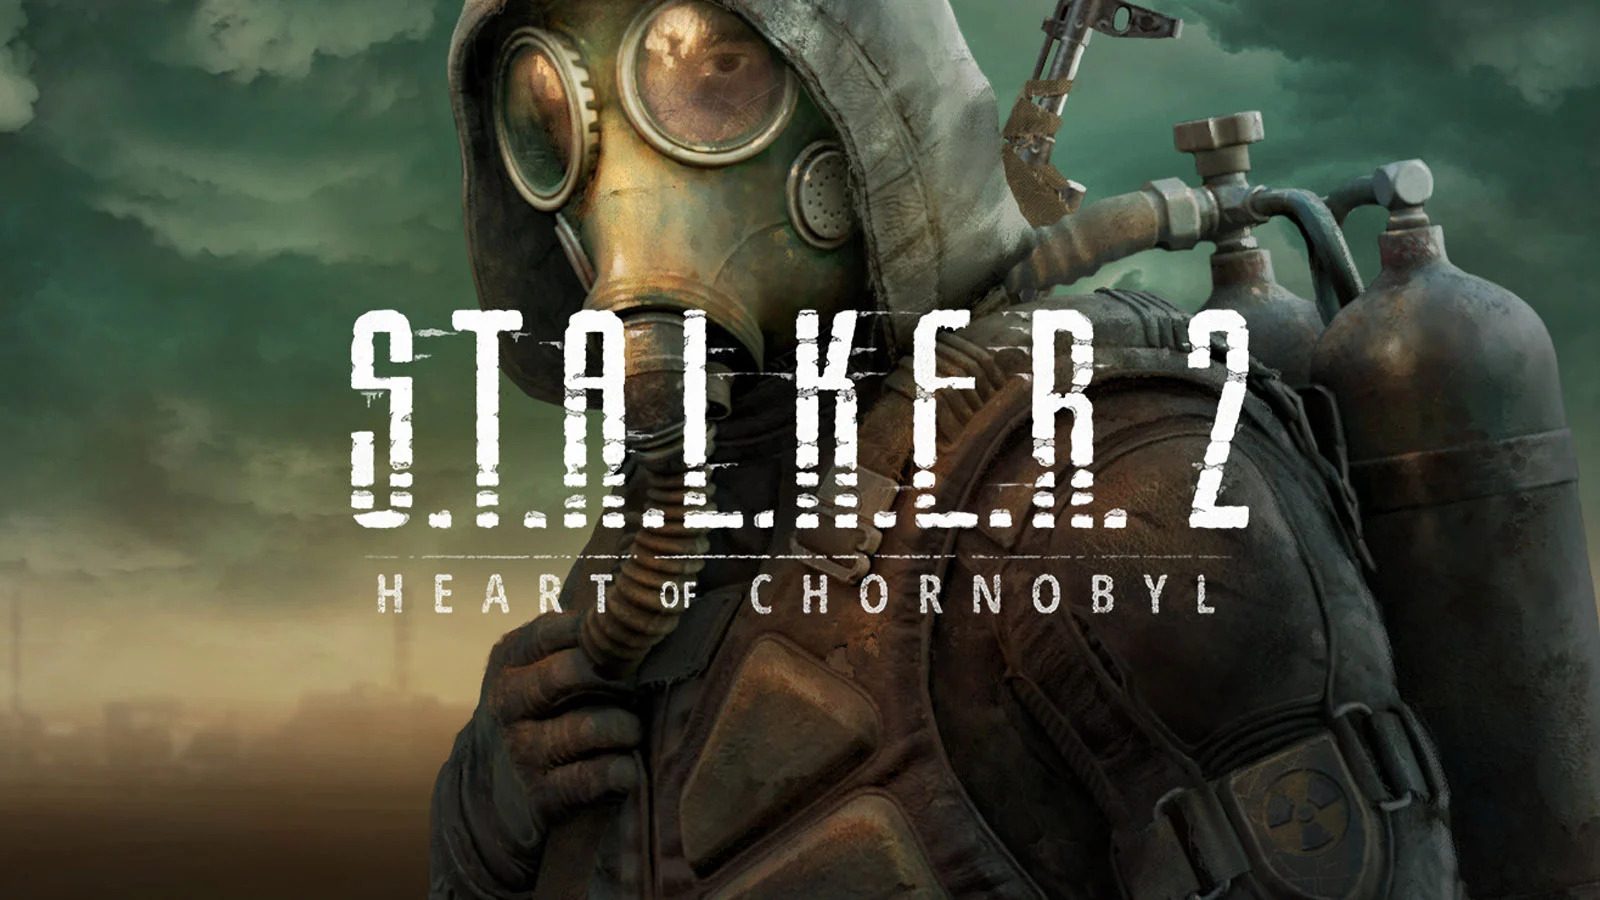 Stalker 2 creeps back into development with a release date of 2021